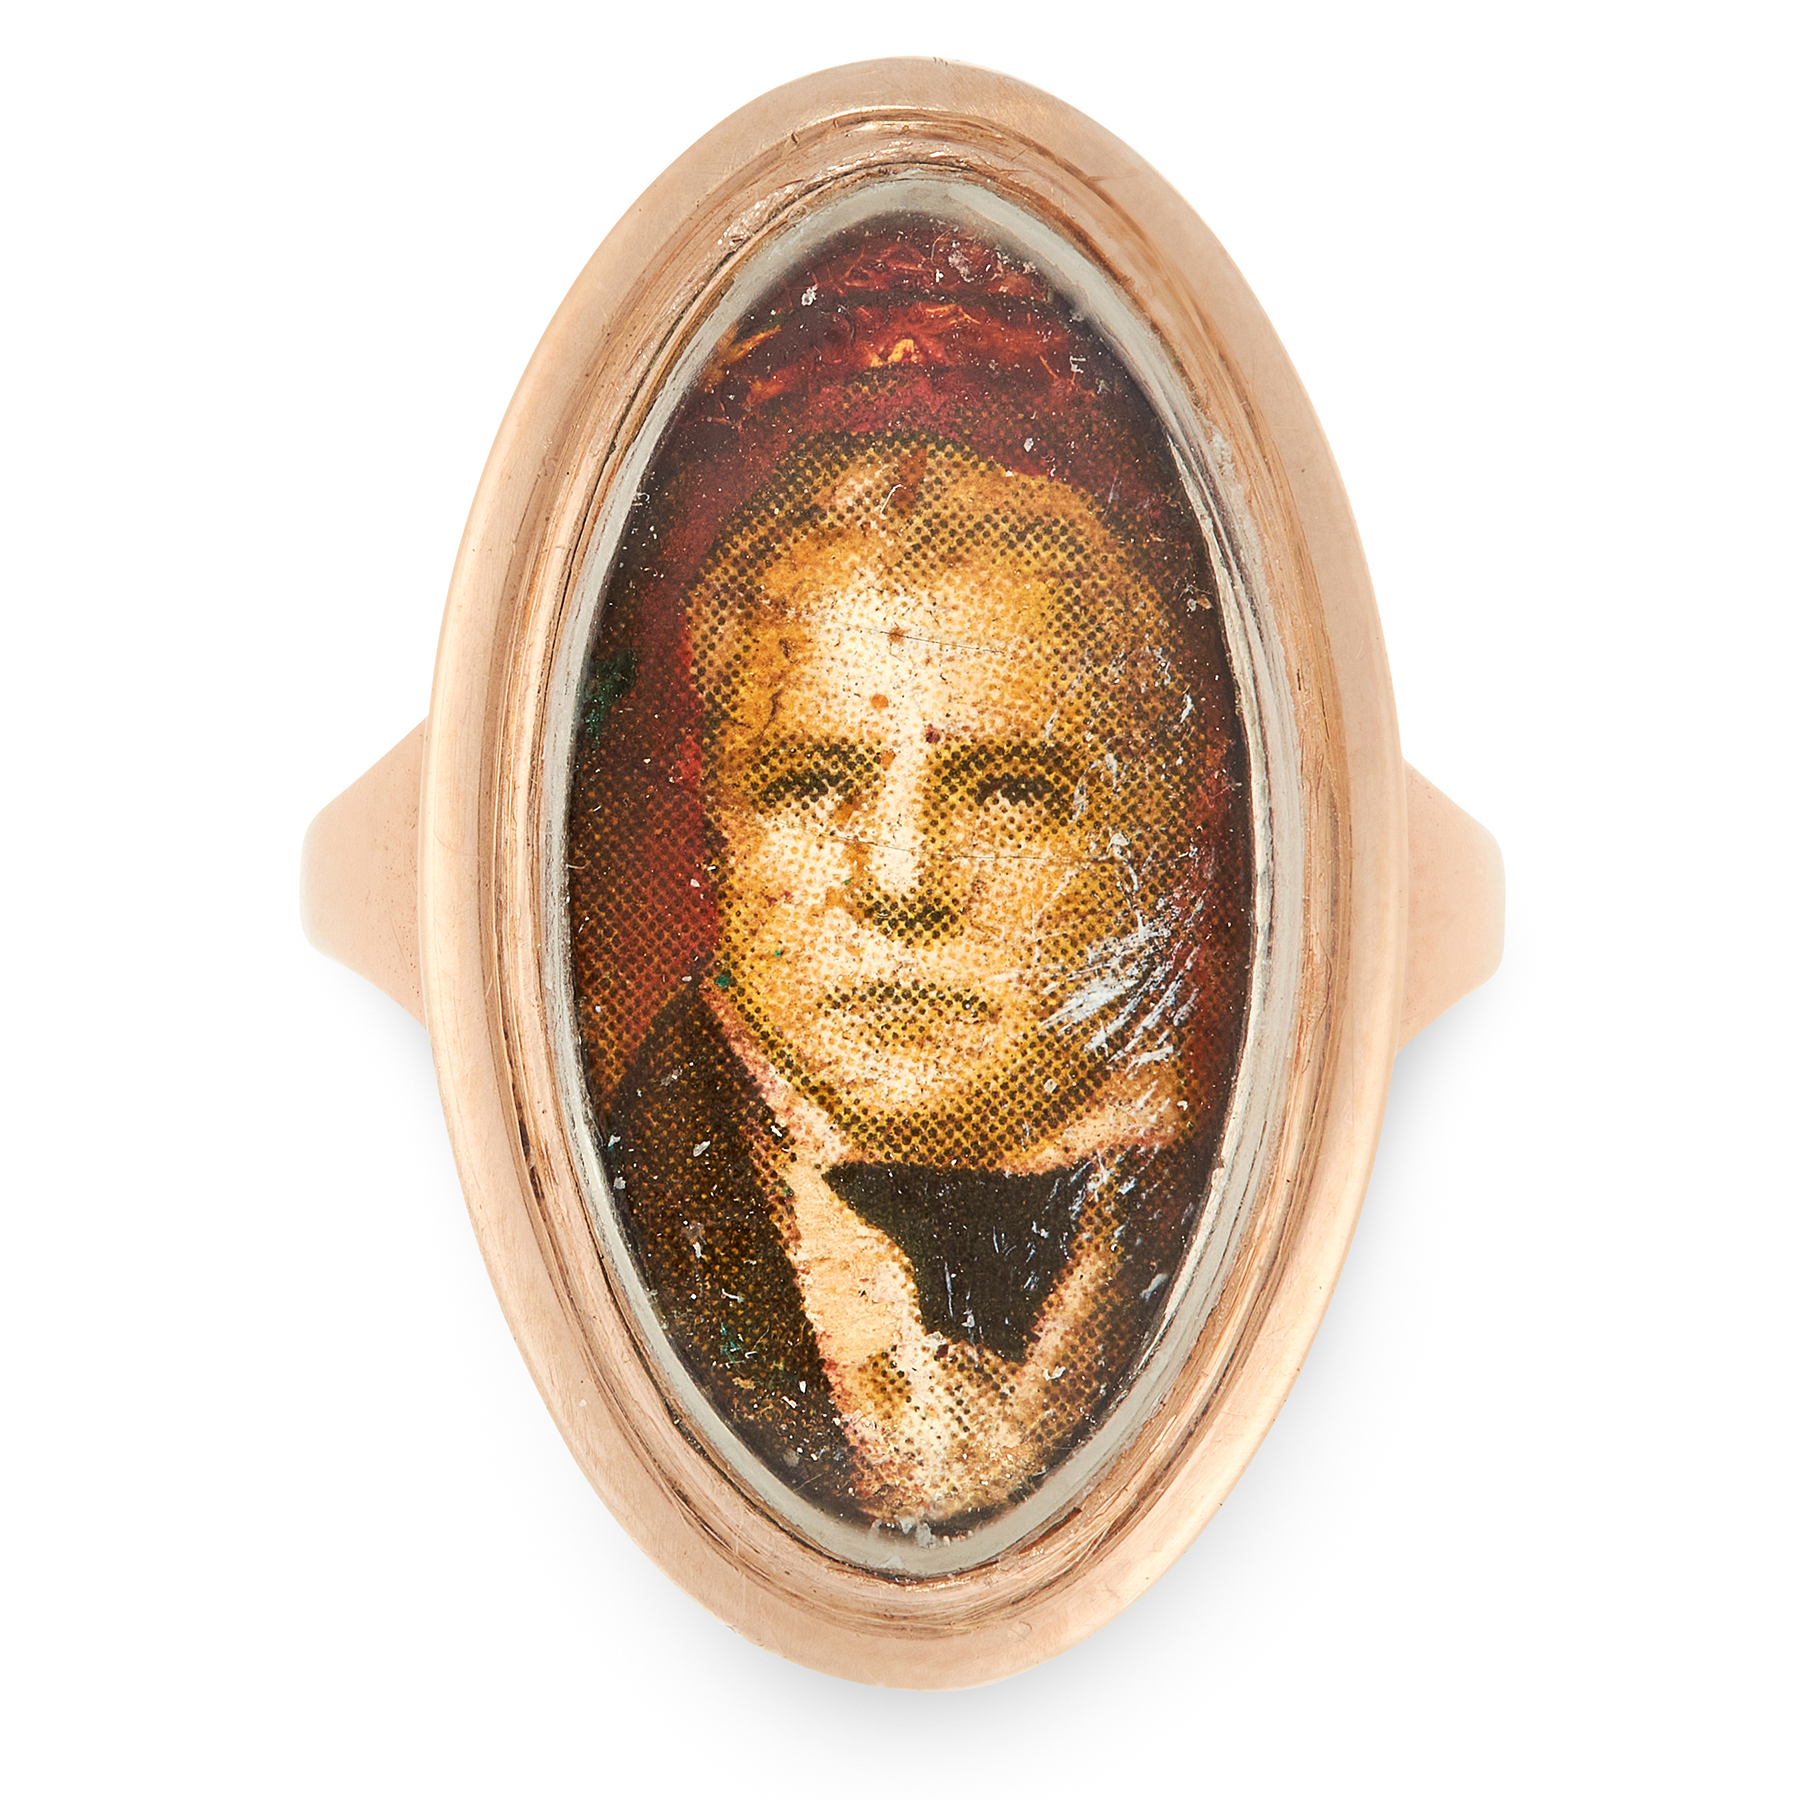 AN ANTIQUE WALTER SCOTT PORTRAIT MINIATURE MOURNING RING in yellow gold, the elongated face is set